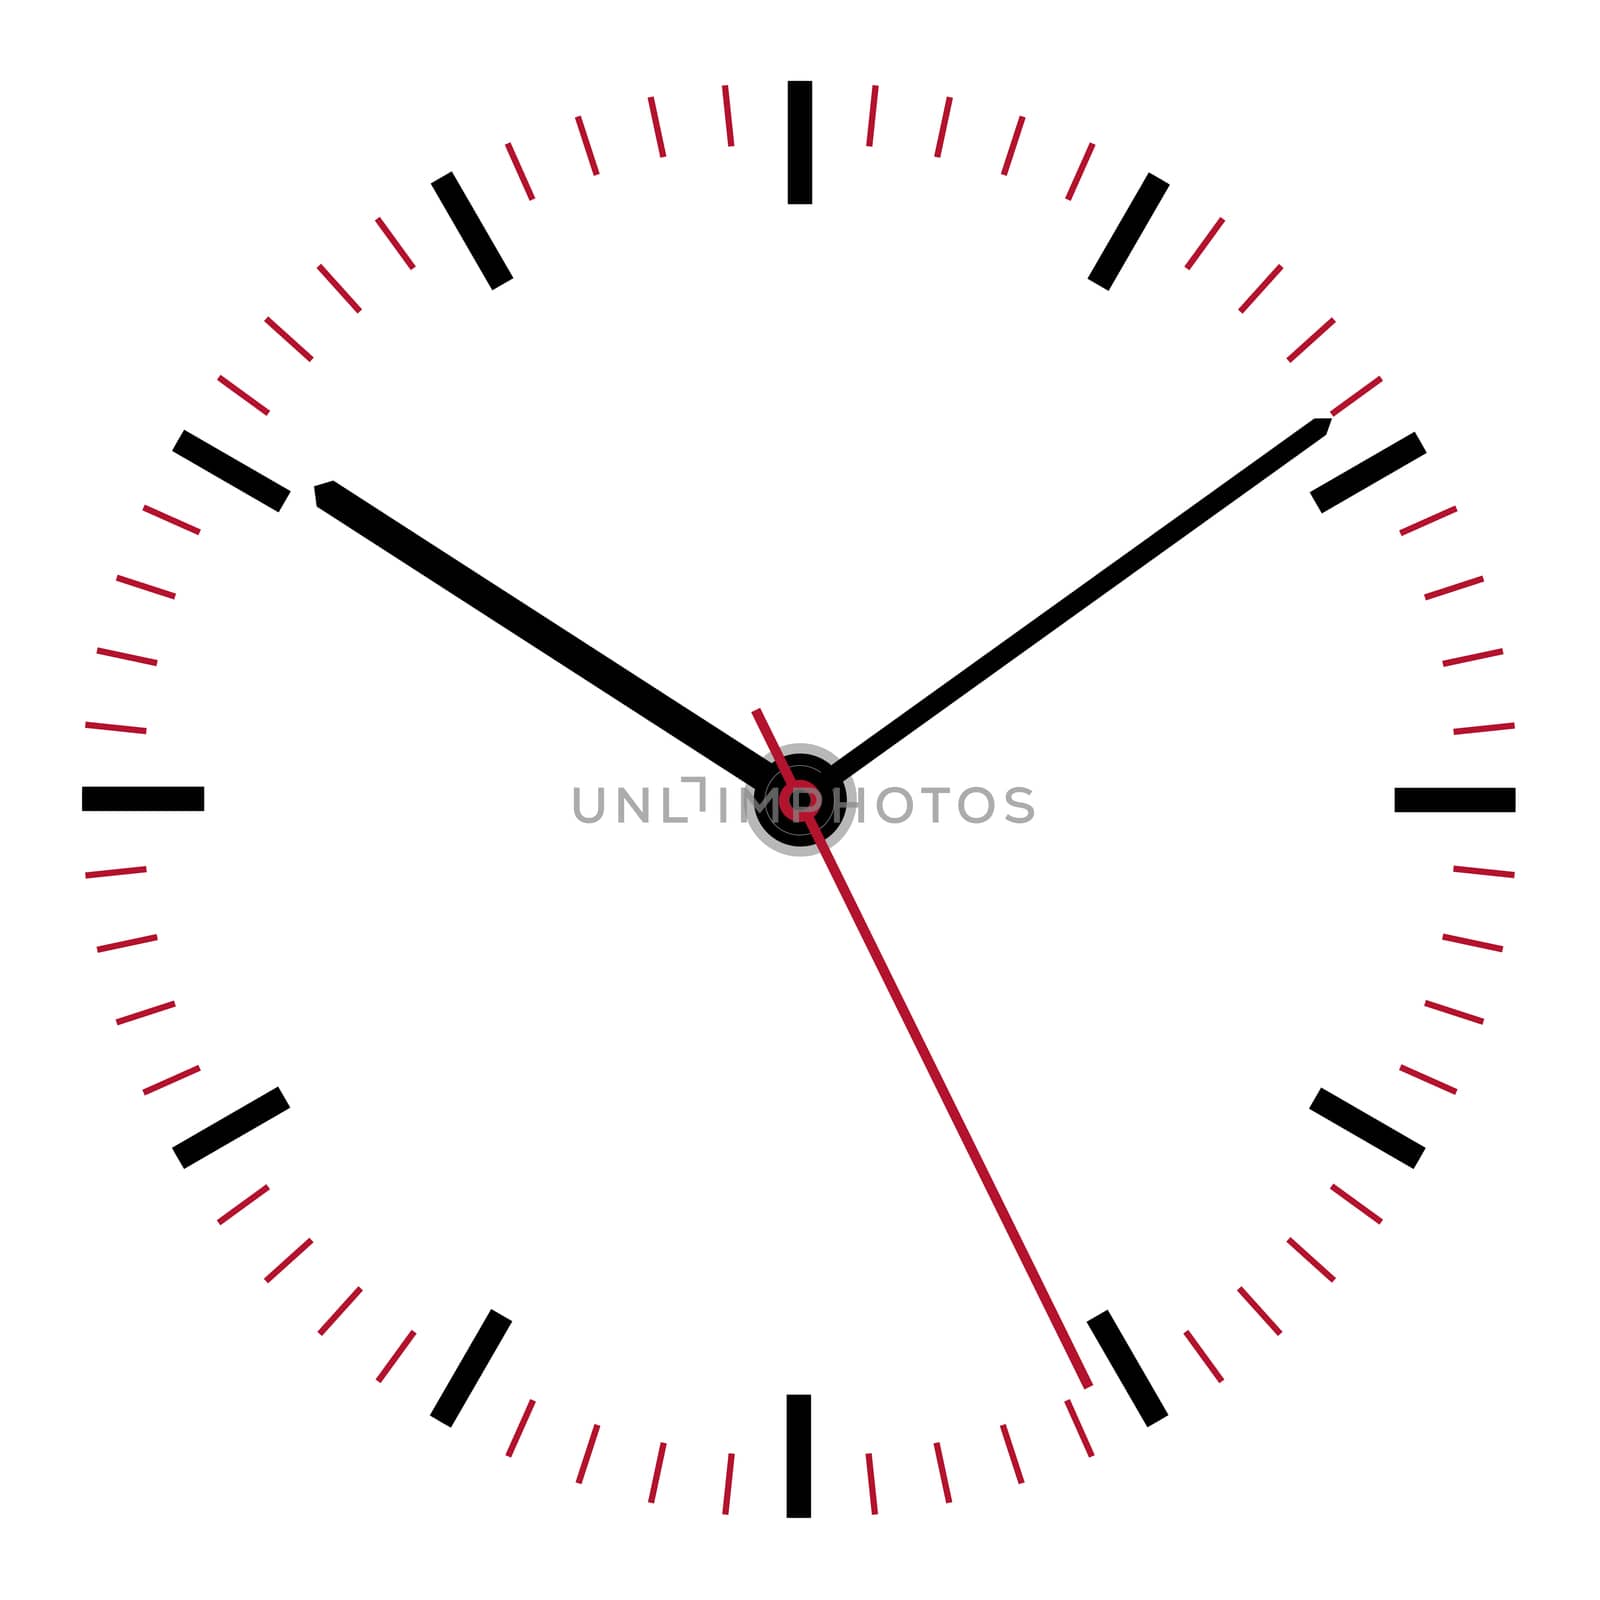 A clock face illustration second minute hour hands